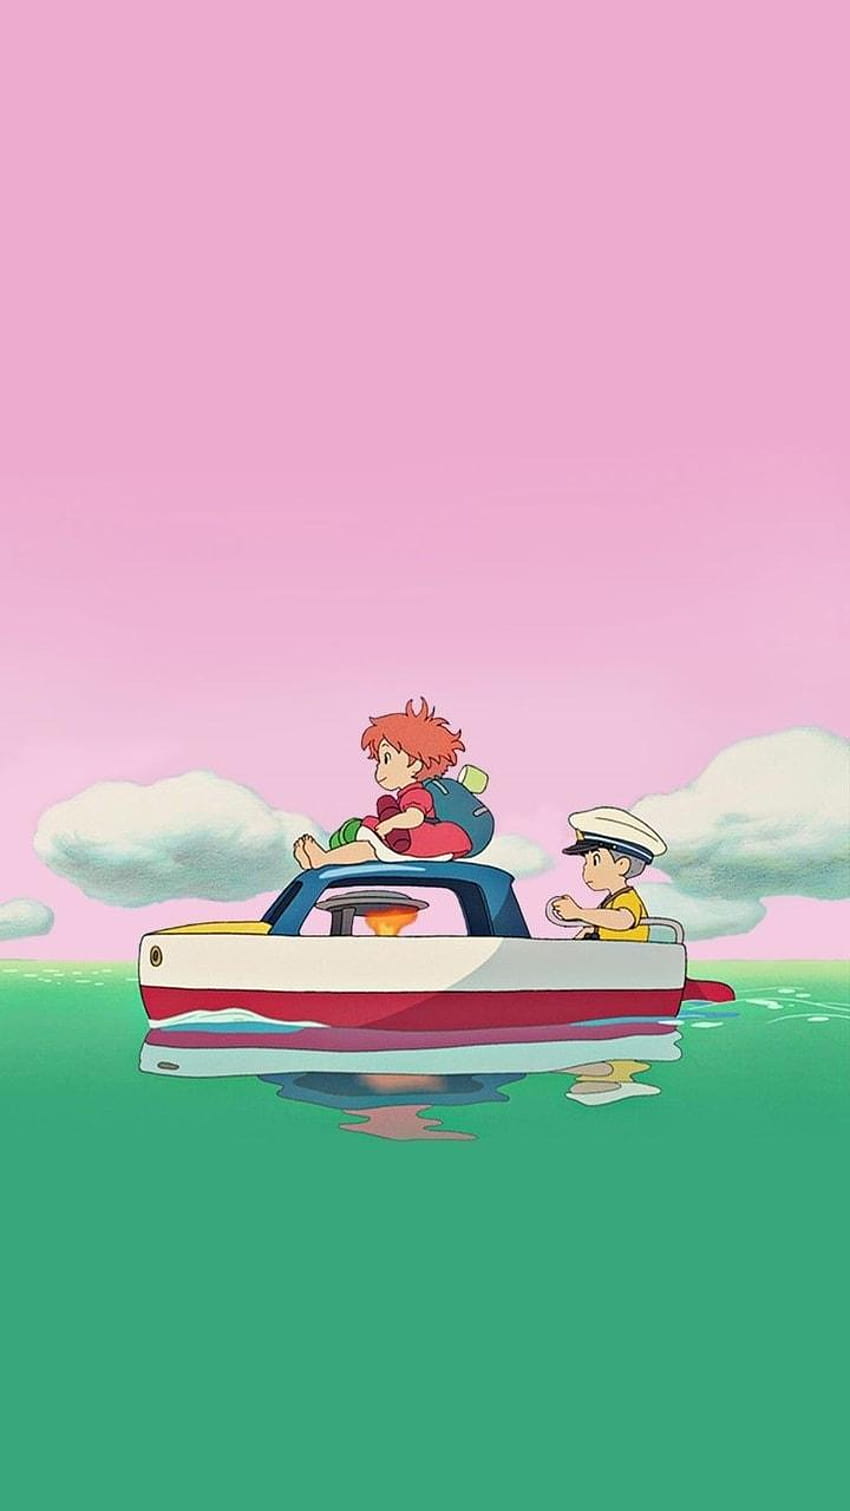 ponyo-on-the-cliff-by-the-sea